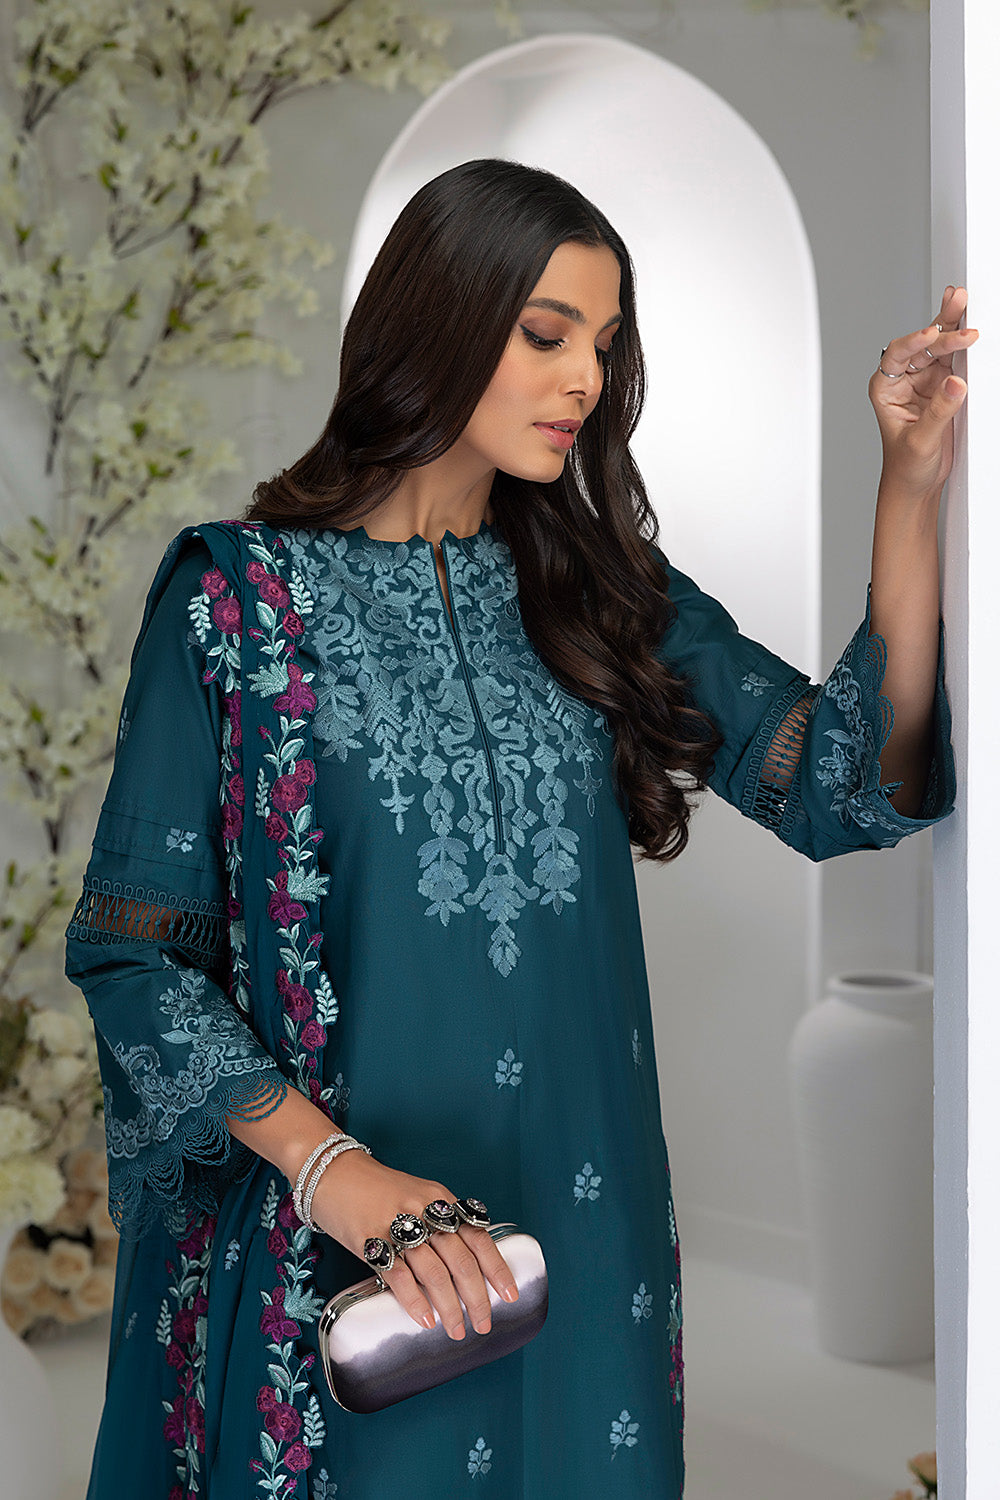 Azure Embroidered Lawn Suits Unstitched 3 Piece AZFL 54 Moonlight